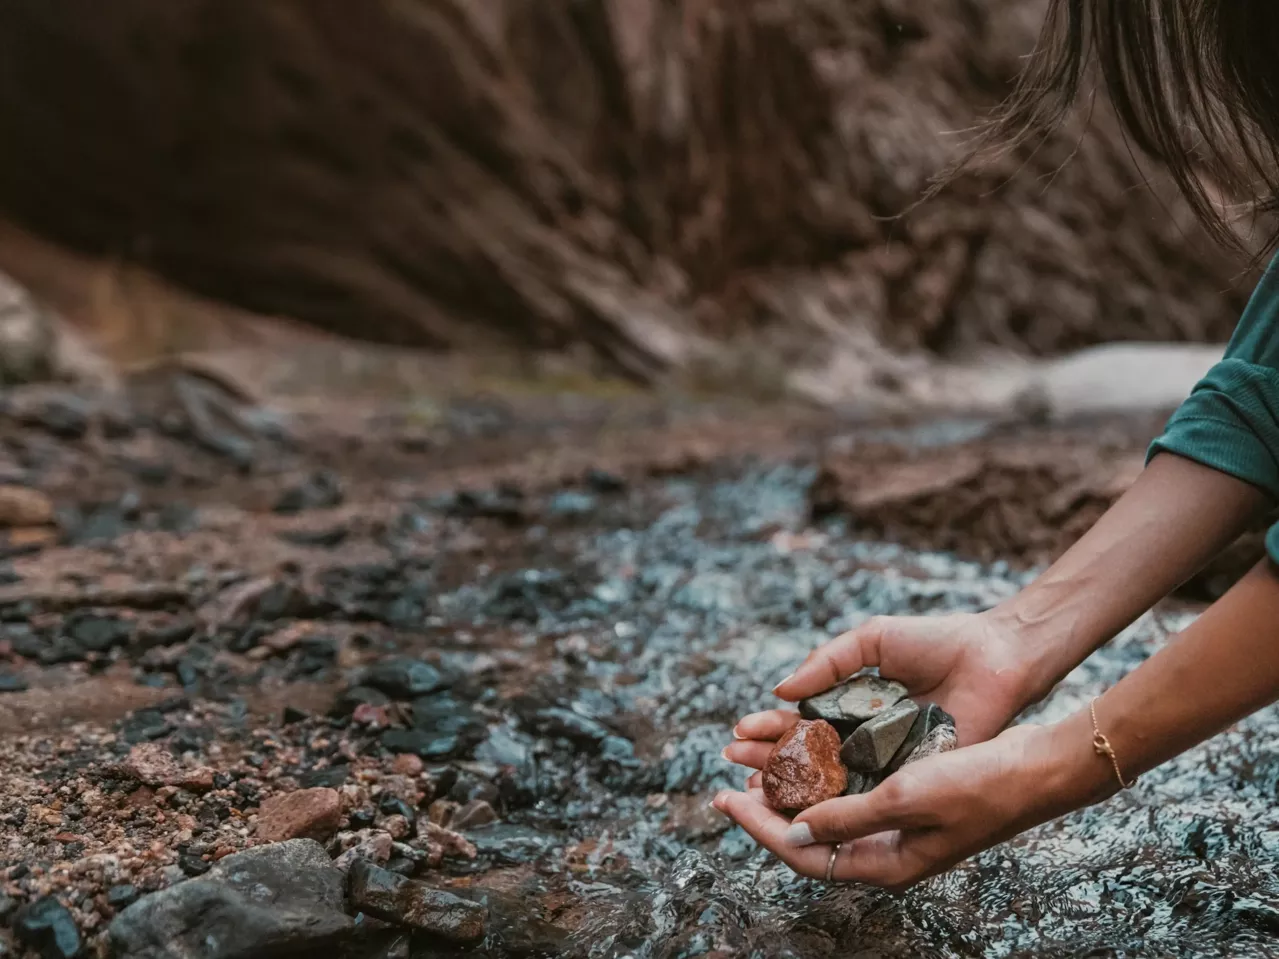 A close-up of a person's hand holding rocks in a clean safe river.